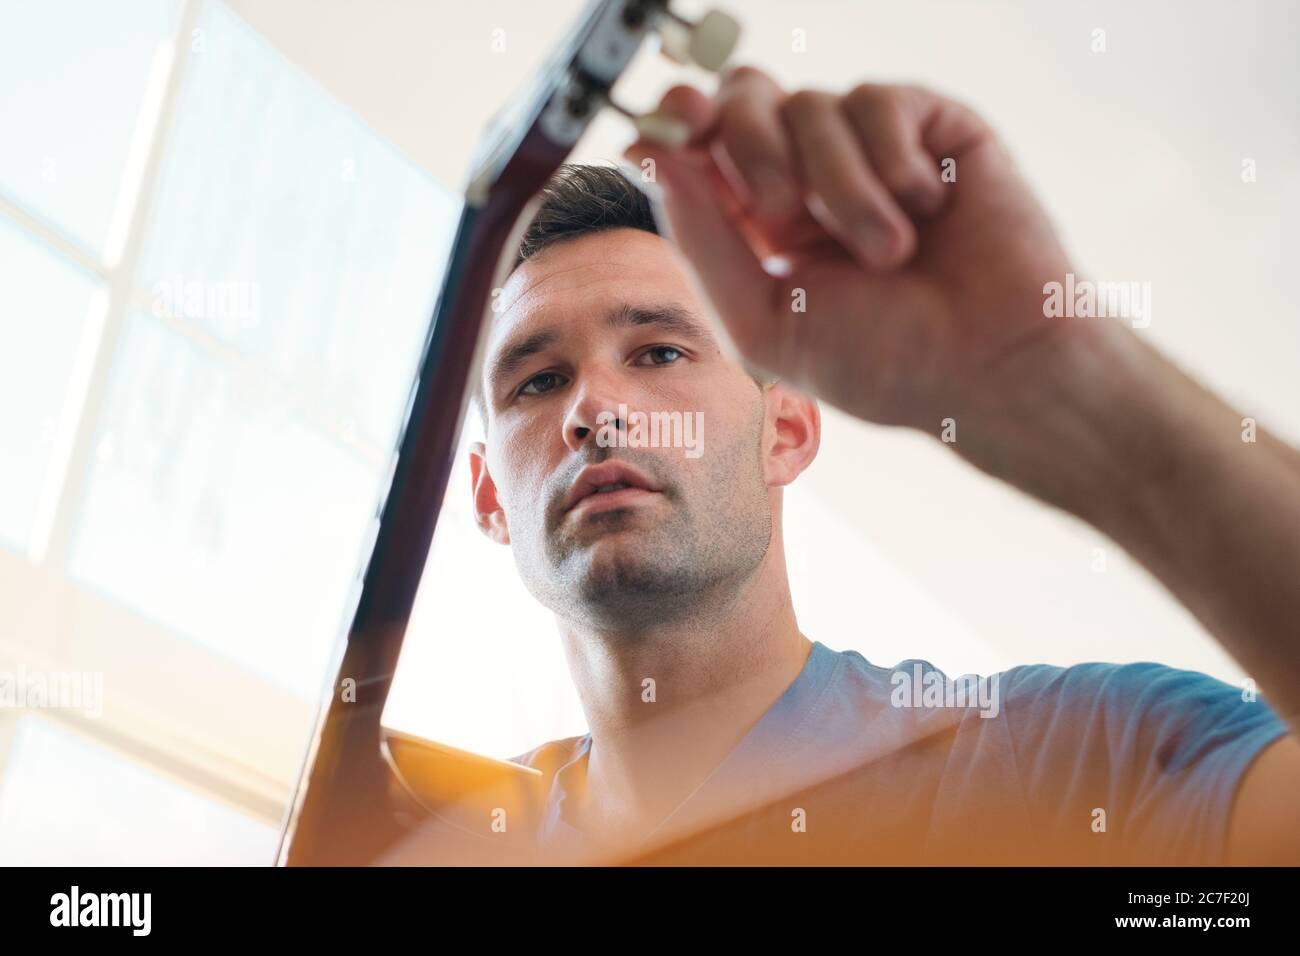 Man Tuning His Acoustic Guitar Before Playing Music Stock Photo